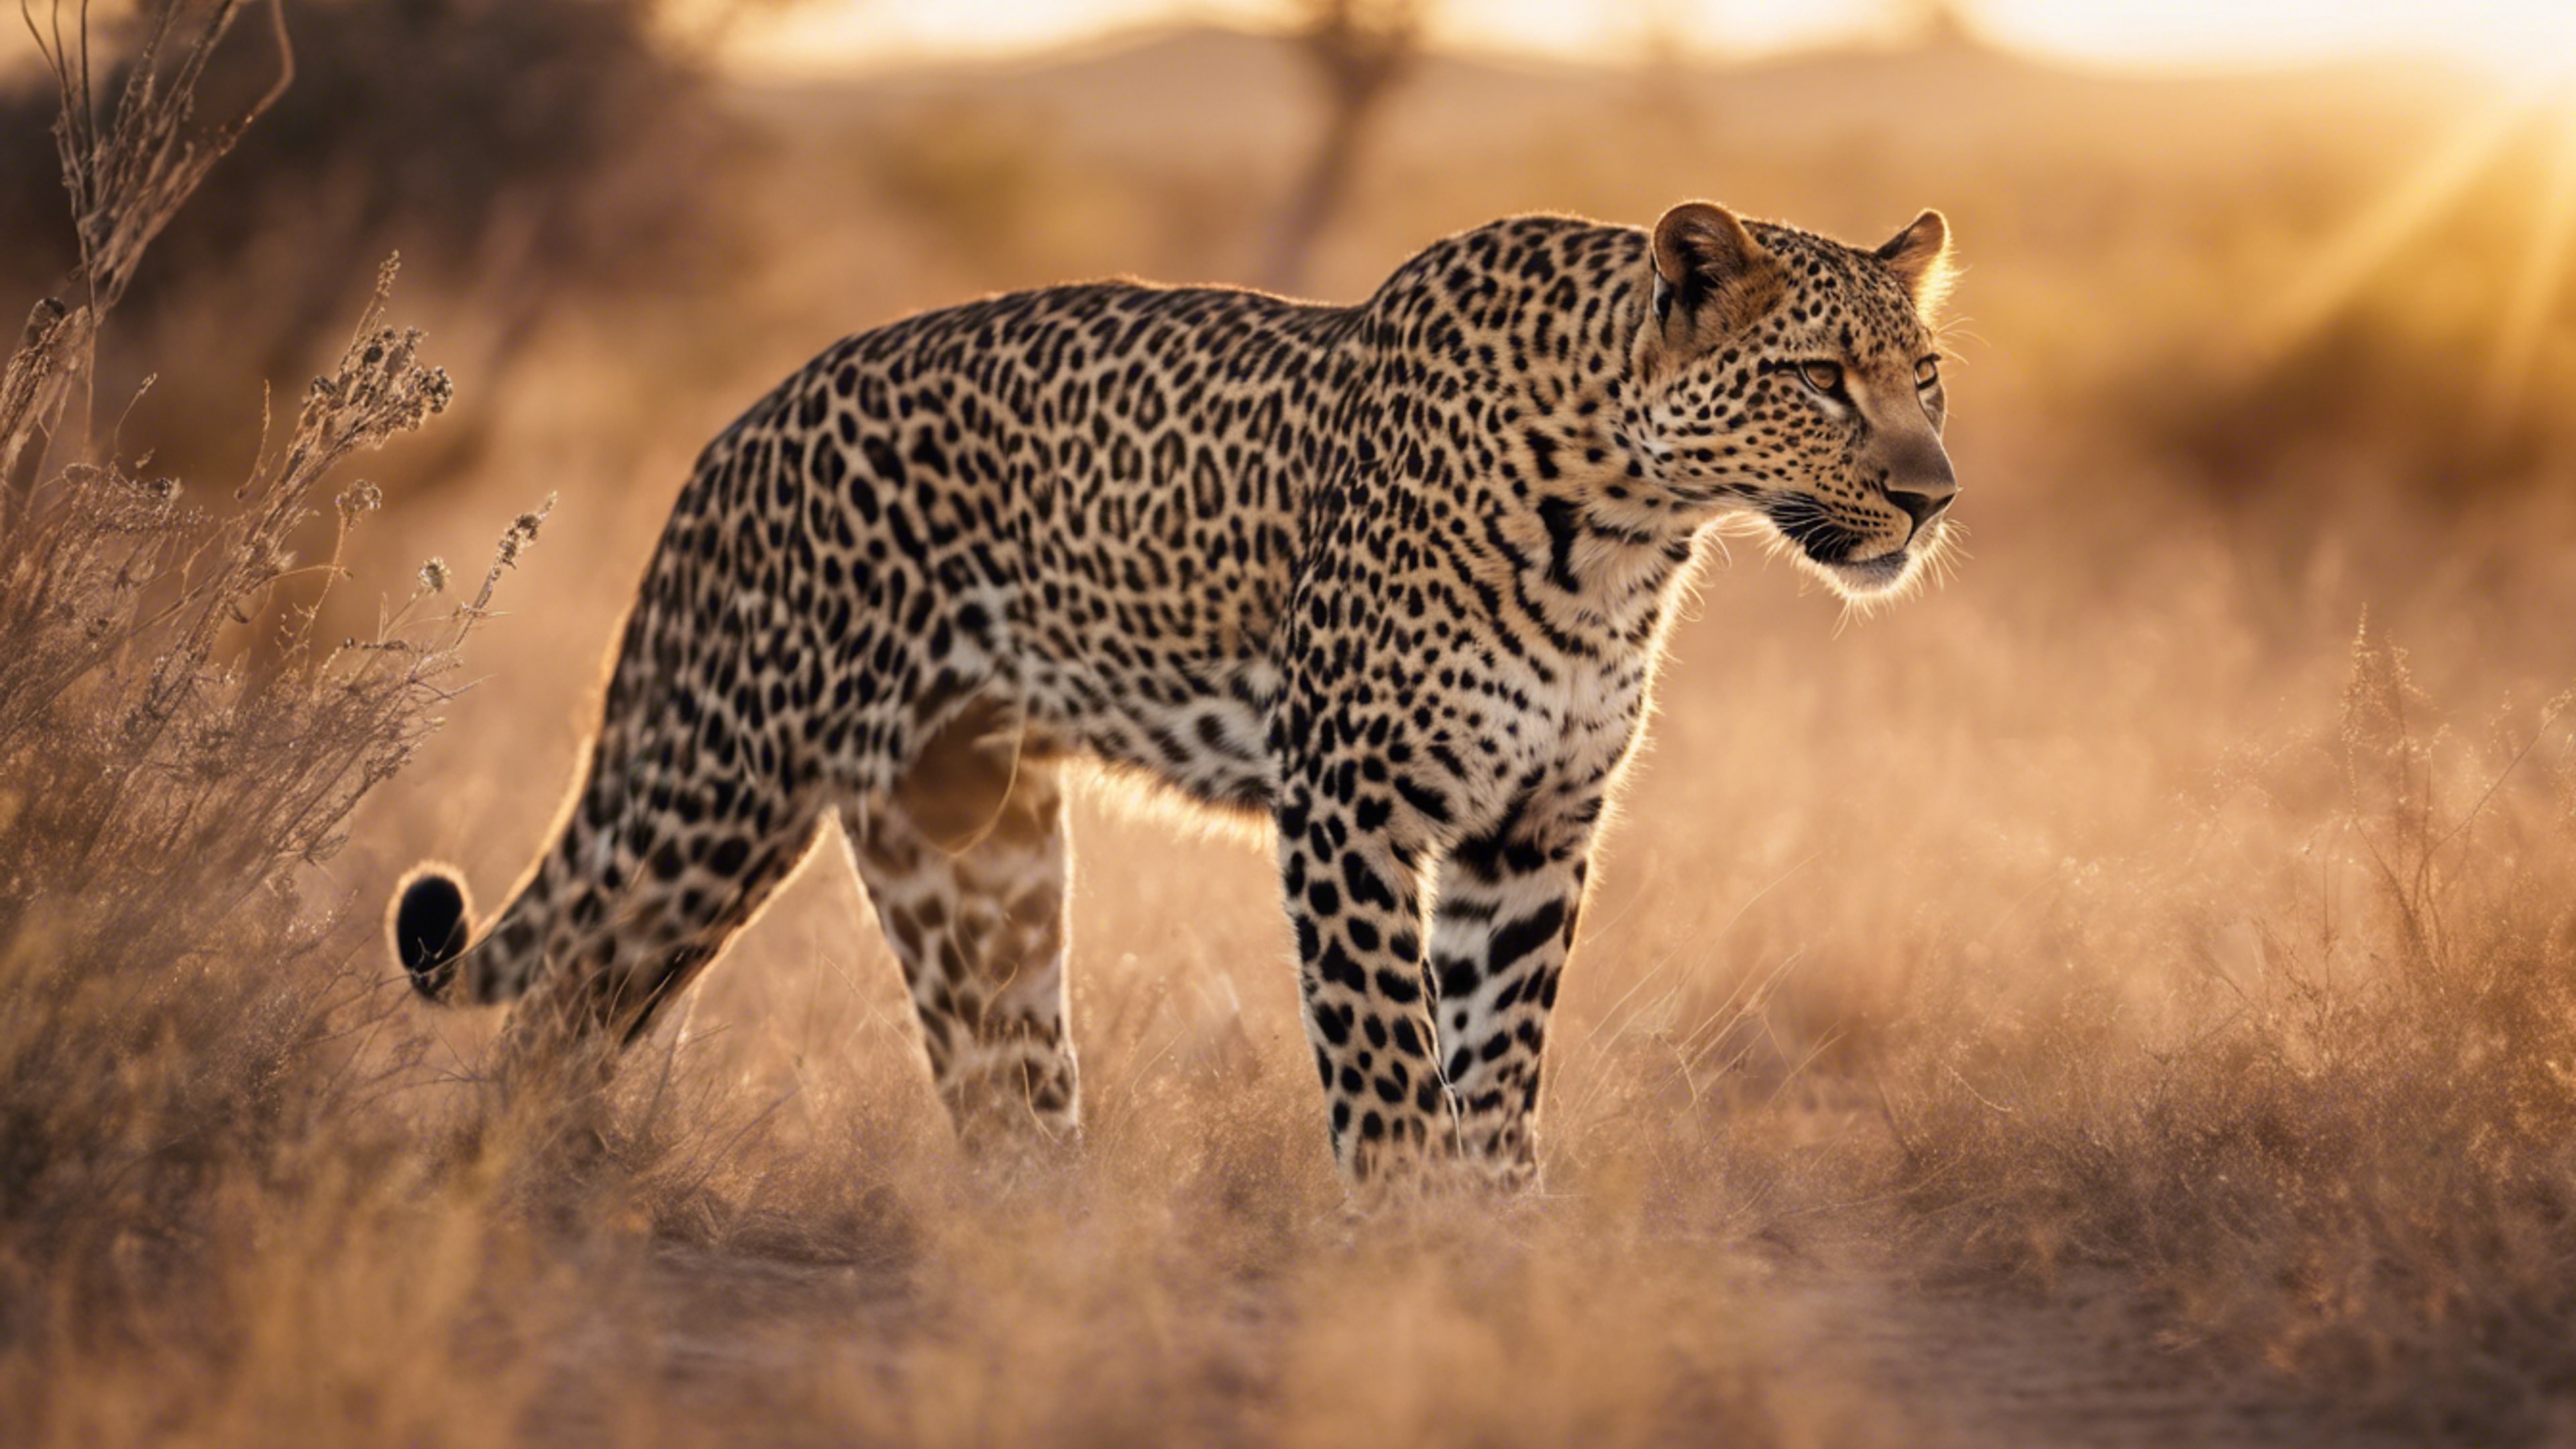 An exhilirating sight of a poised leopard preparing for a sprint in an African savannah under a radiant sunset. Wallpaper[7b65642c729d452b9bb9]